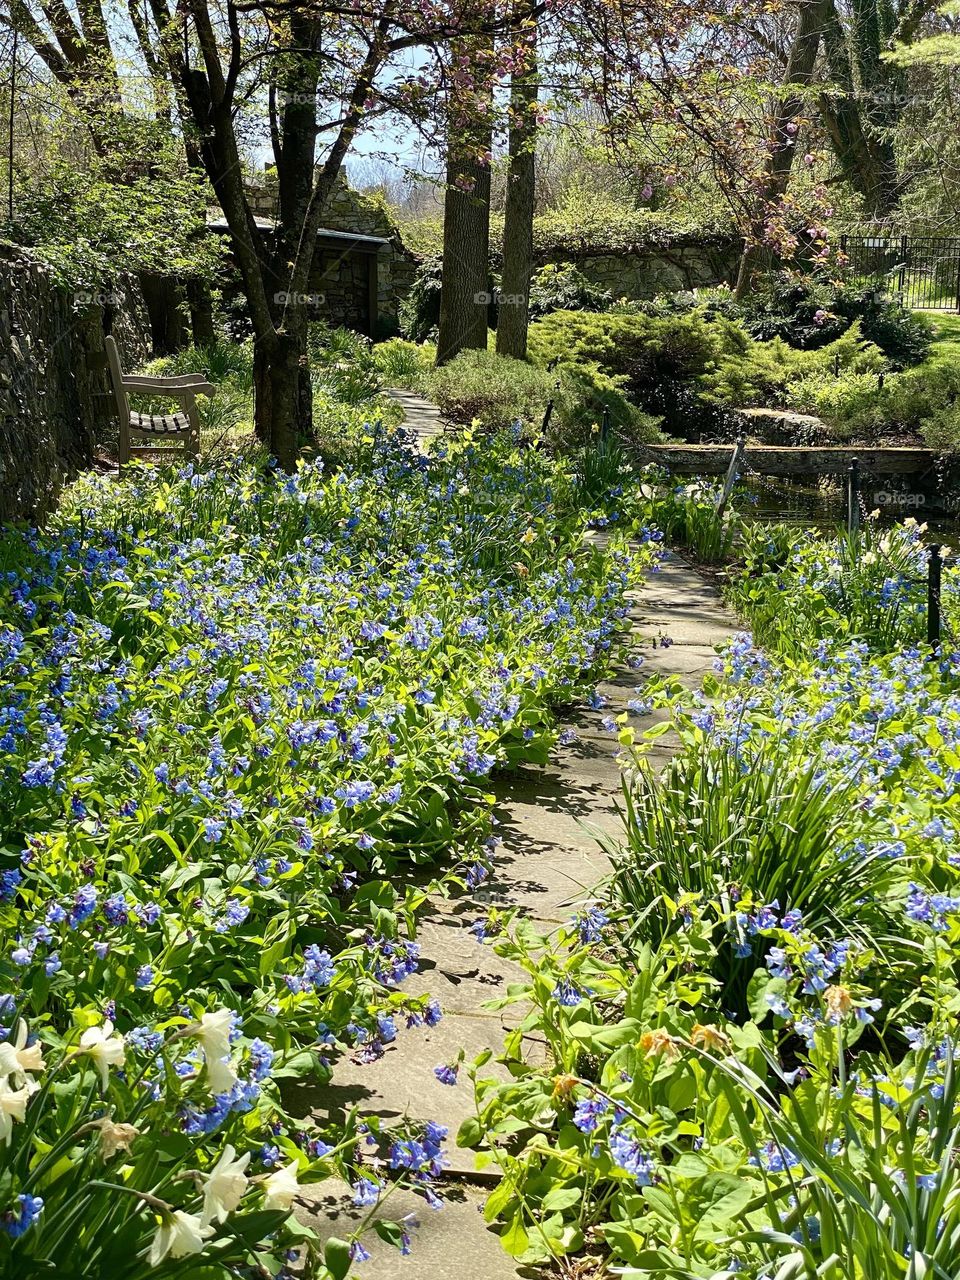 A garden path surrounded by Virginia bluebells going past a park bench